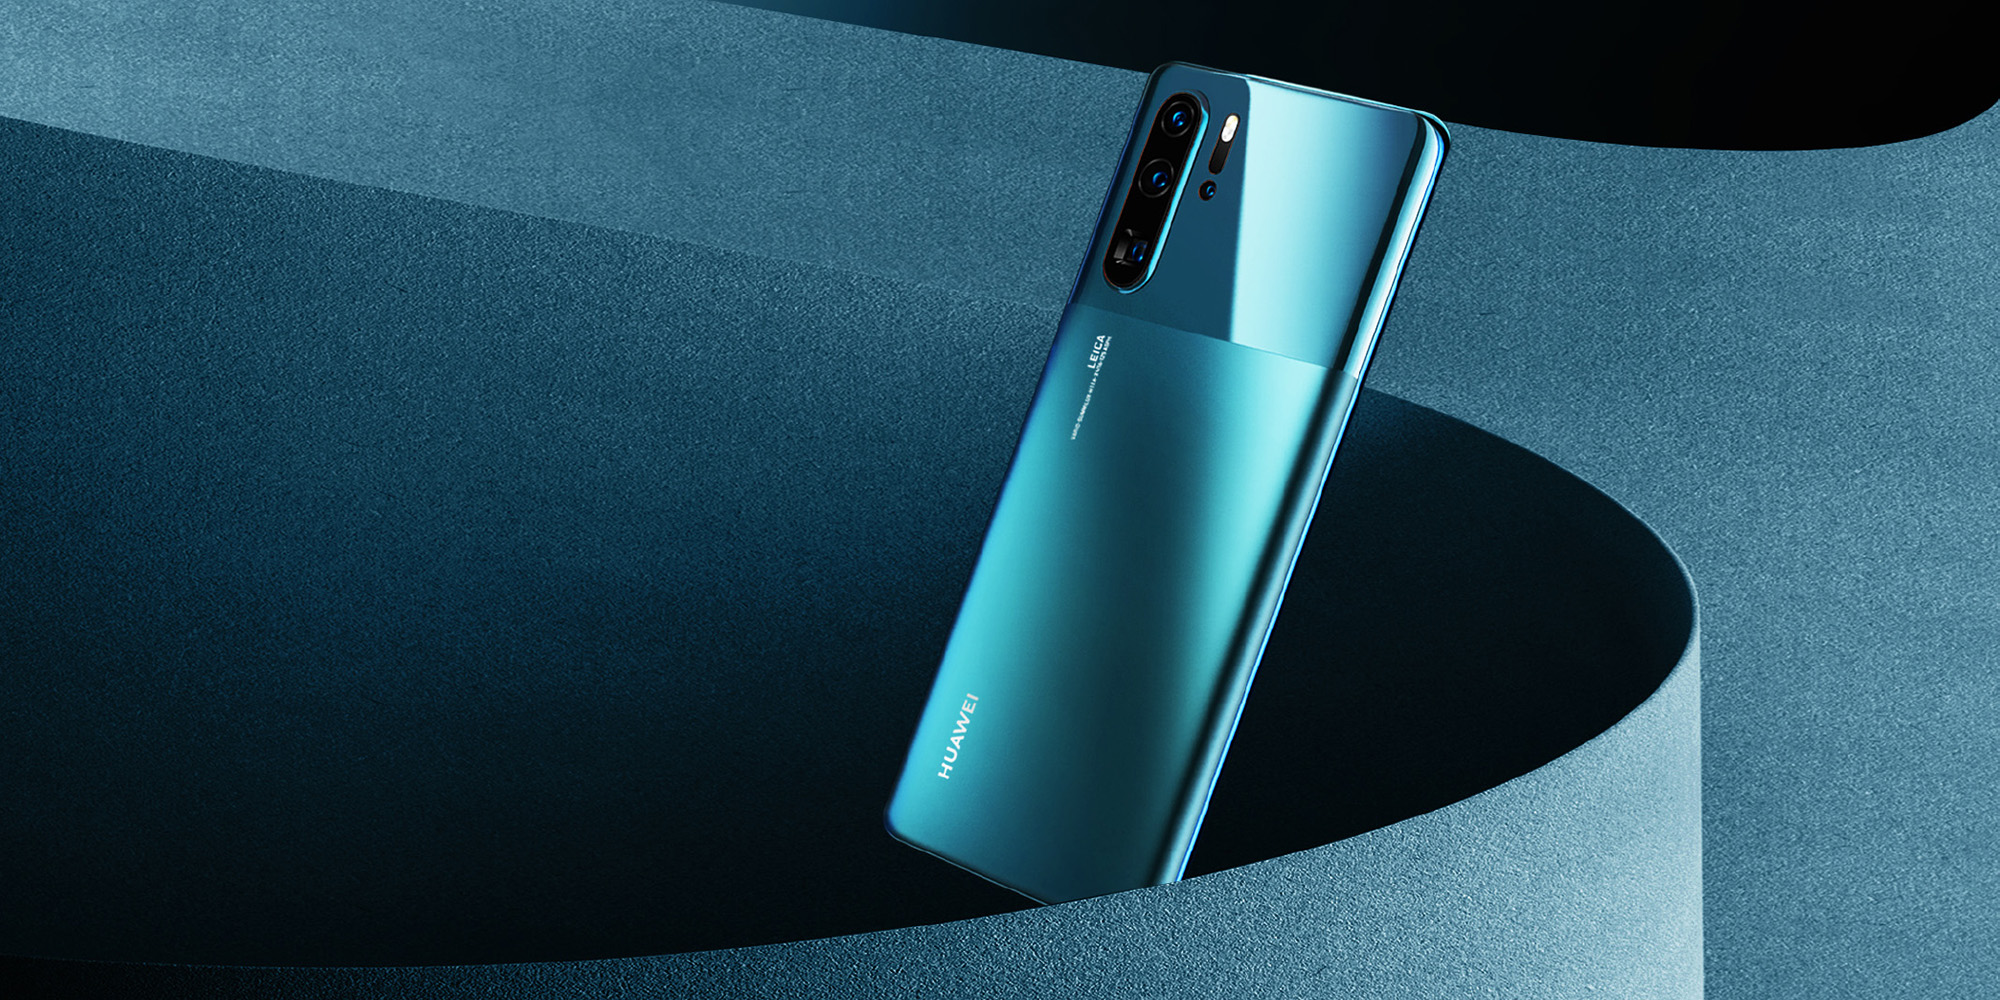 New' Huawei P30 Pro goes official as 16 